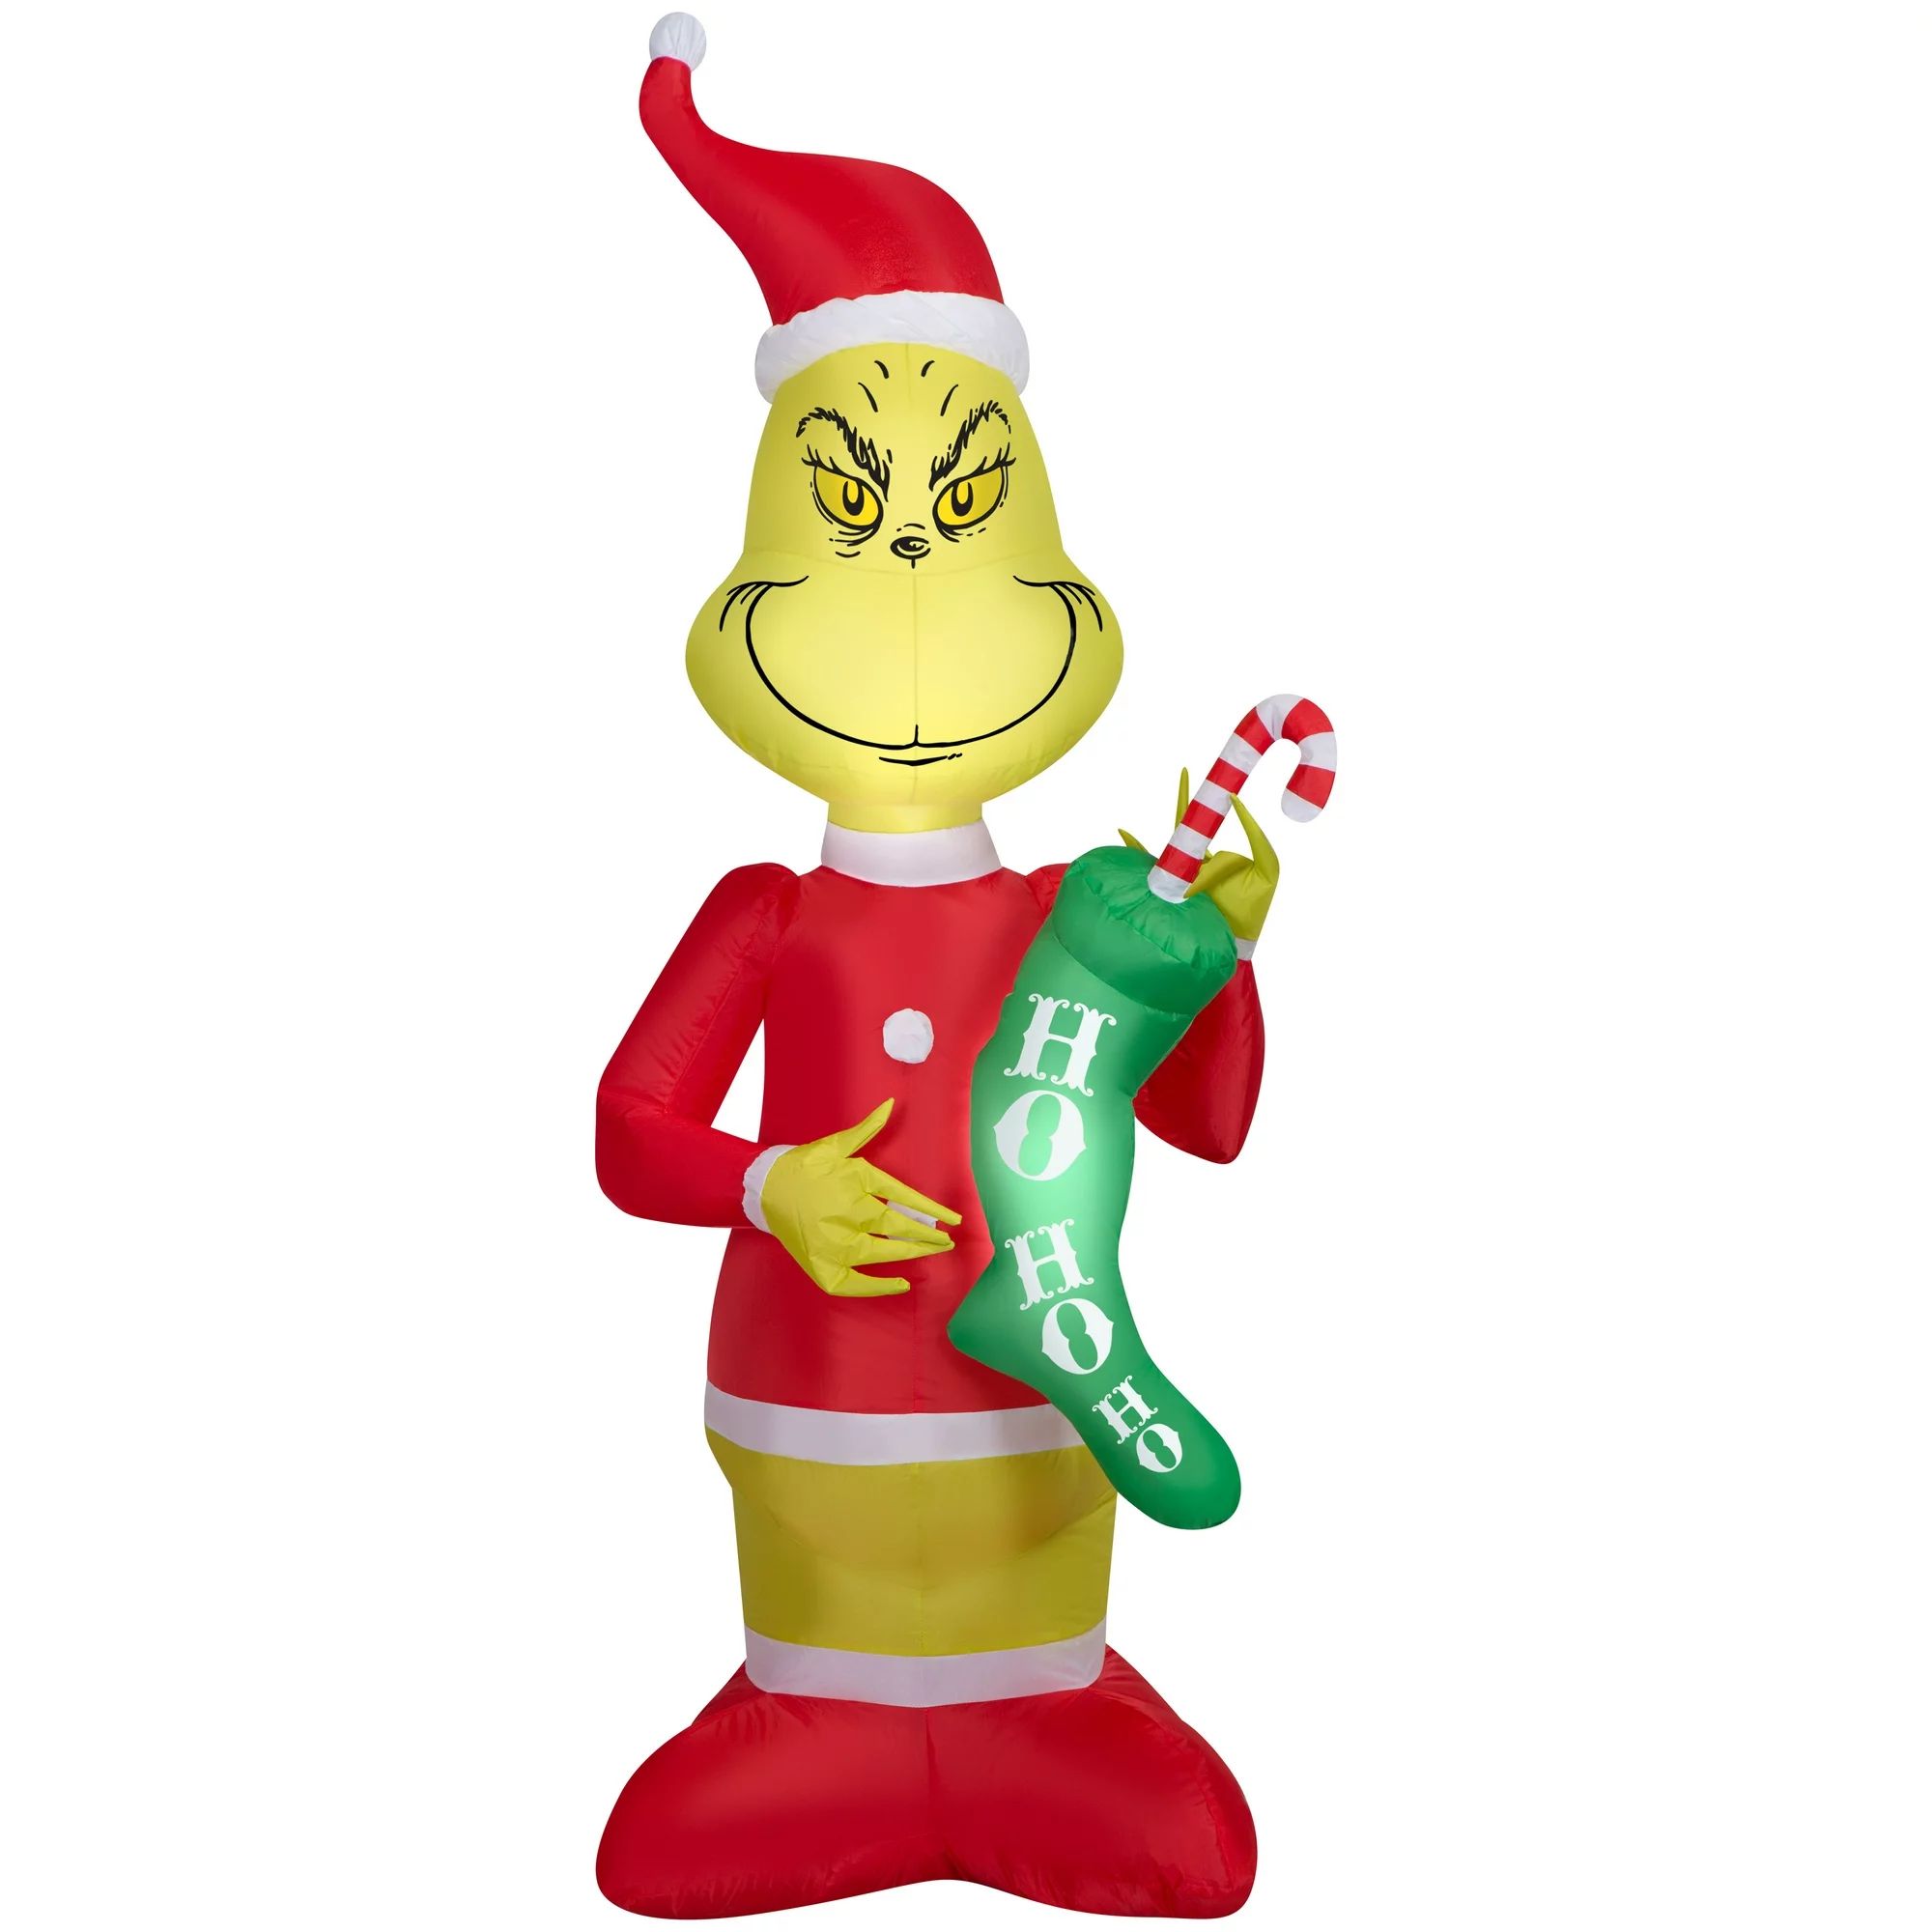 Airblown Inflatables 5.5 Foot The Grinch Decoration | Walmart (US)